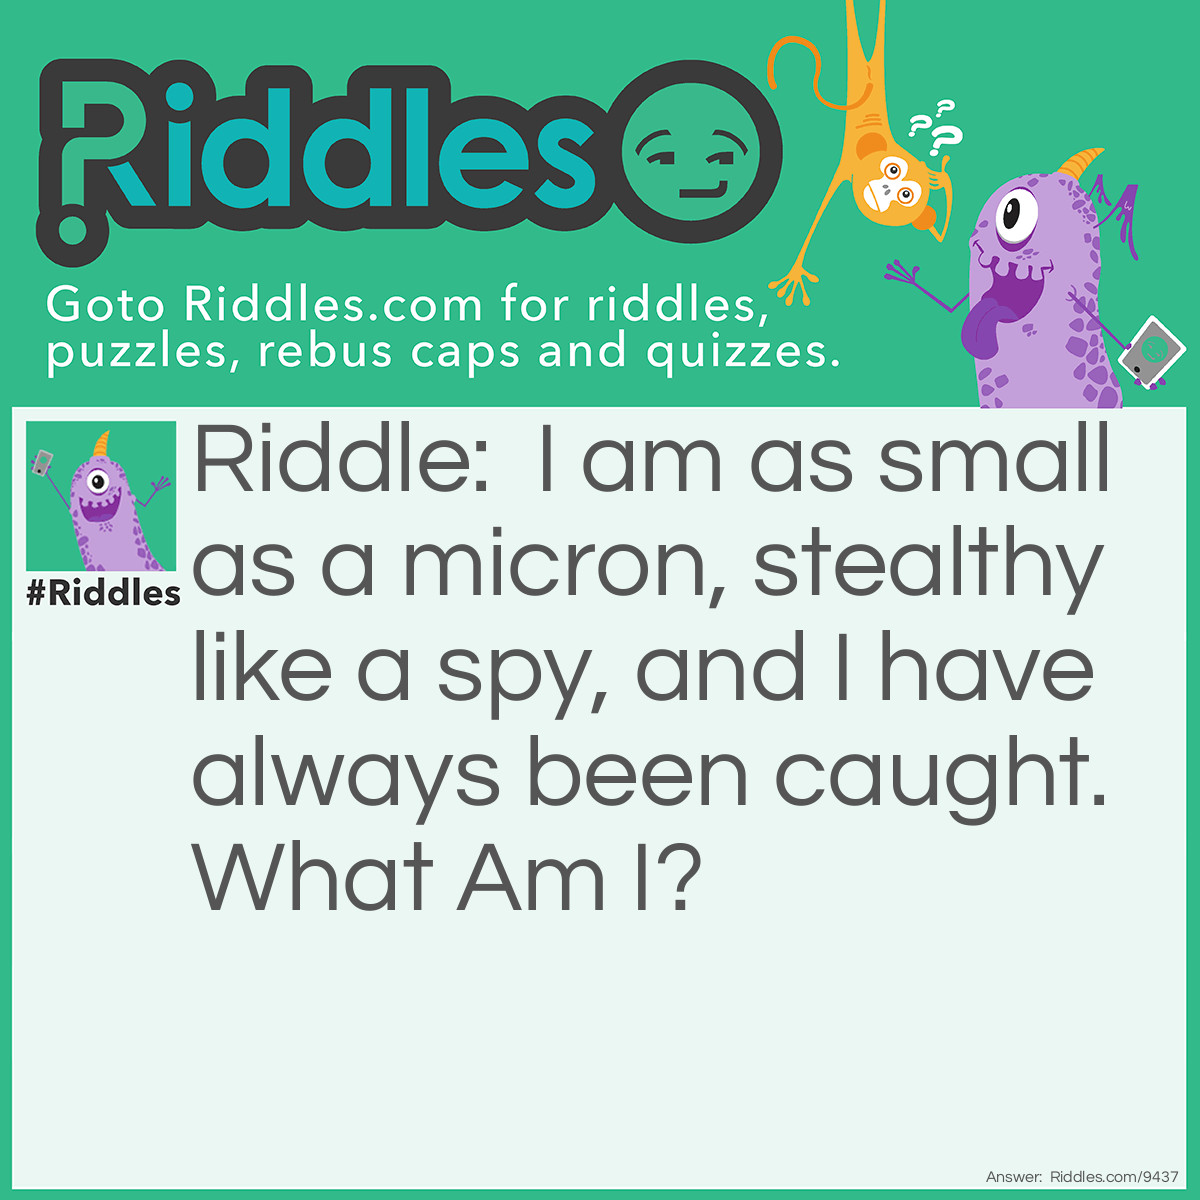 Riddle: I am as small as a micron, stealthy like a spy, and I have always been caught. What Am I? Answer: A Virus!